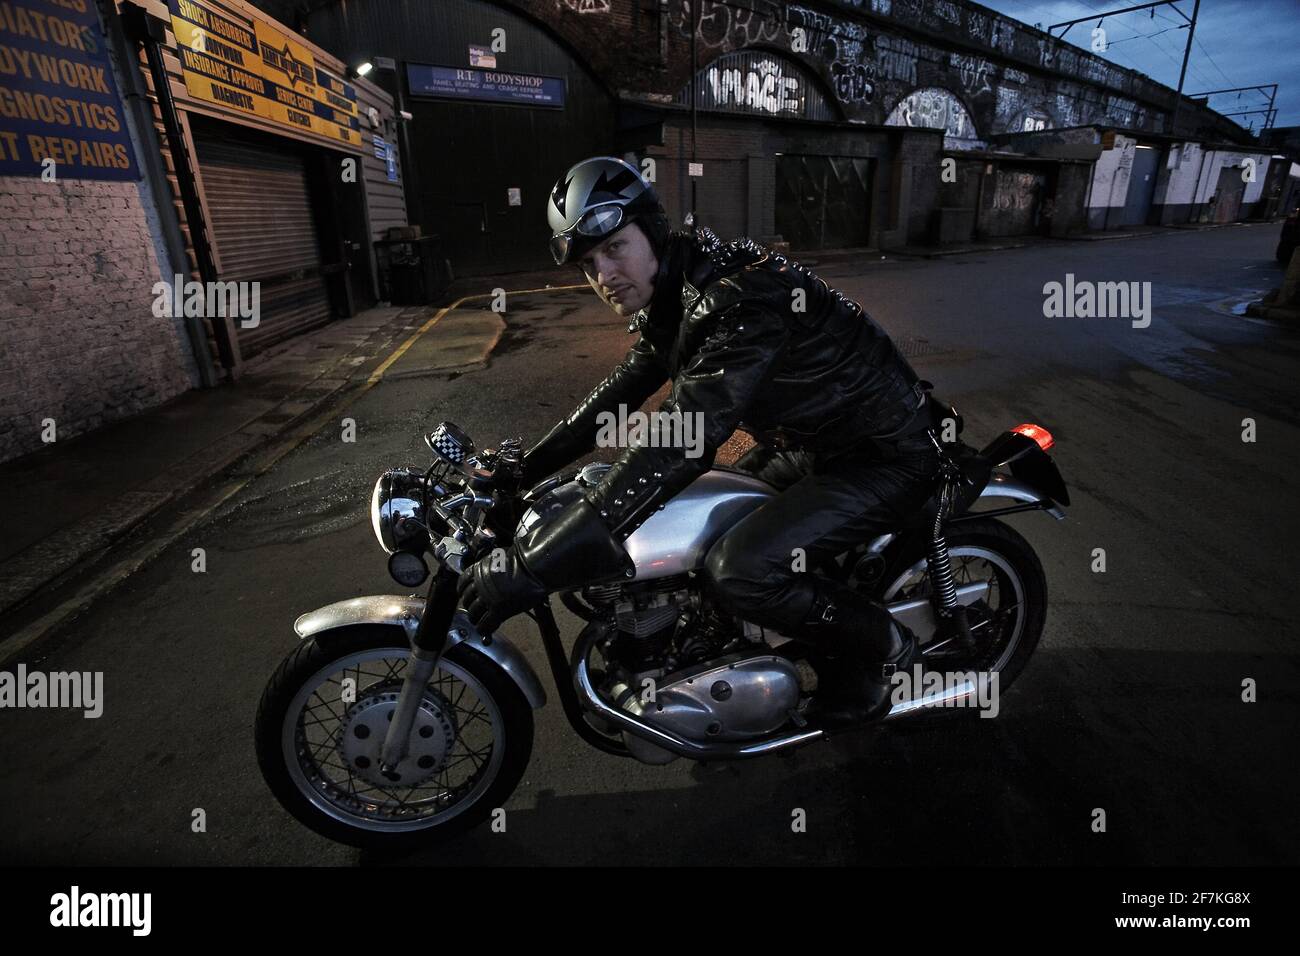 A rider races a cafe racer custom motorcycle in London , Uk Stock Photo